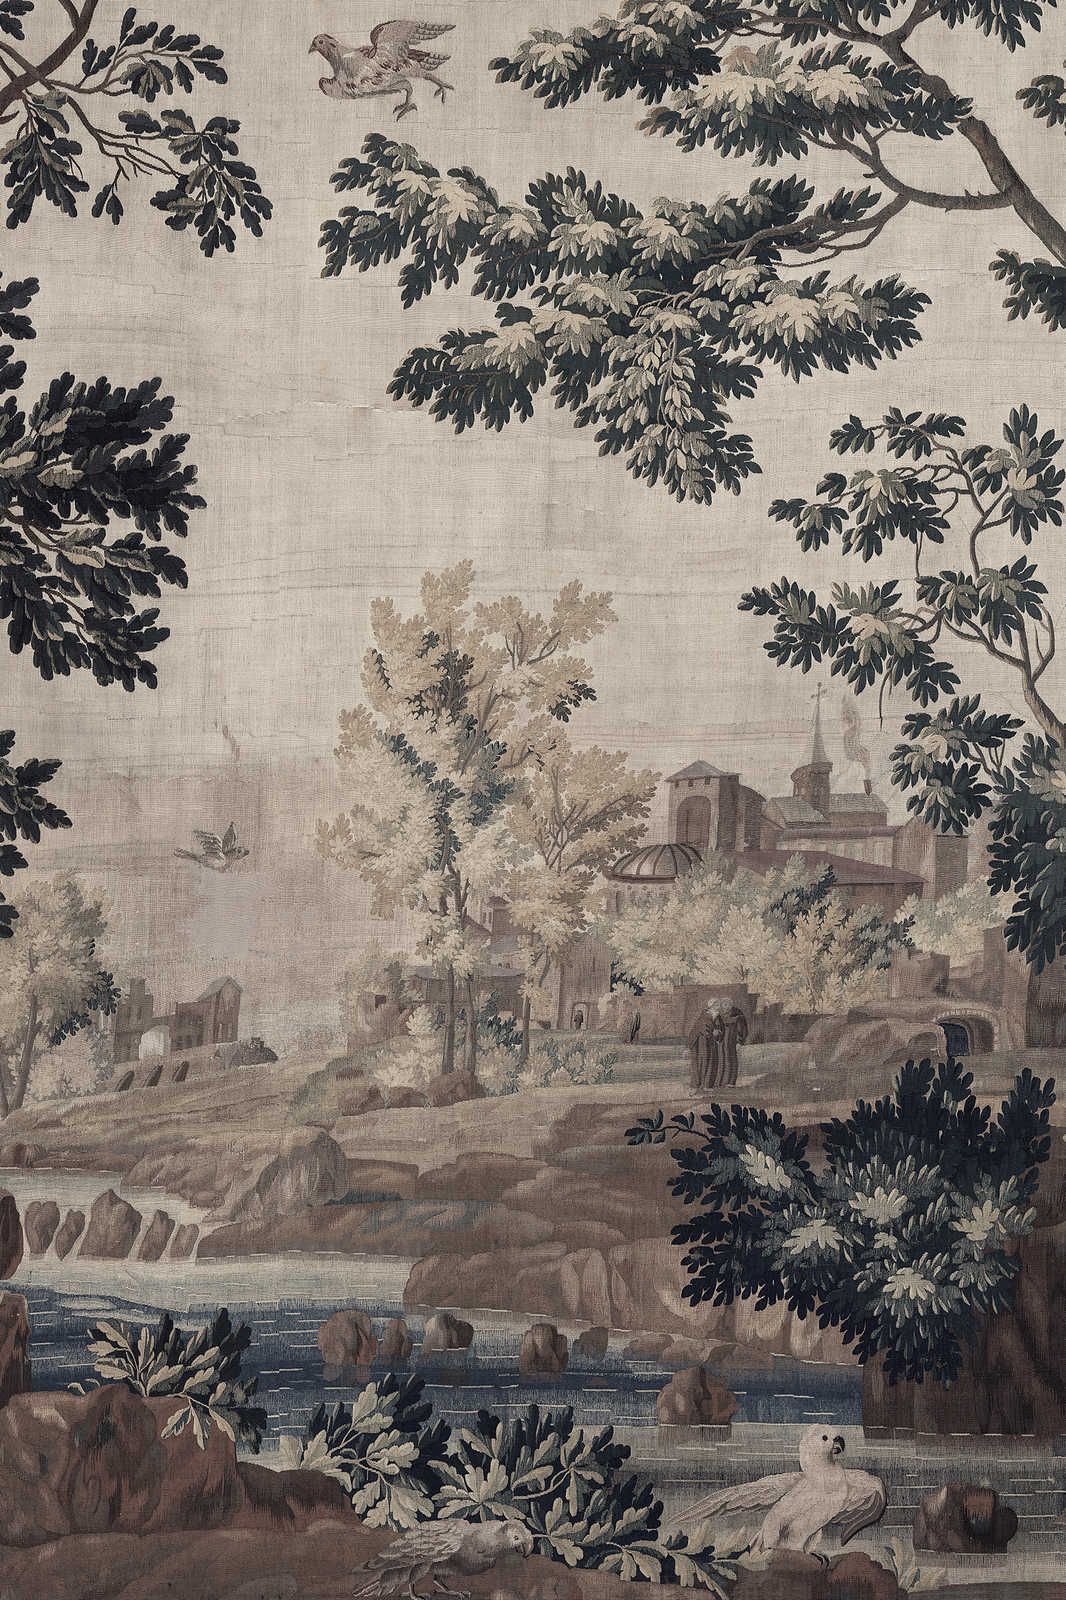             Tapestry Gallery 1 - Landscape canvas picture historical tapestry - 0.90 m x 0.60 m
        